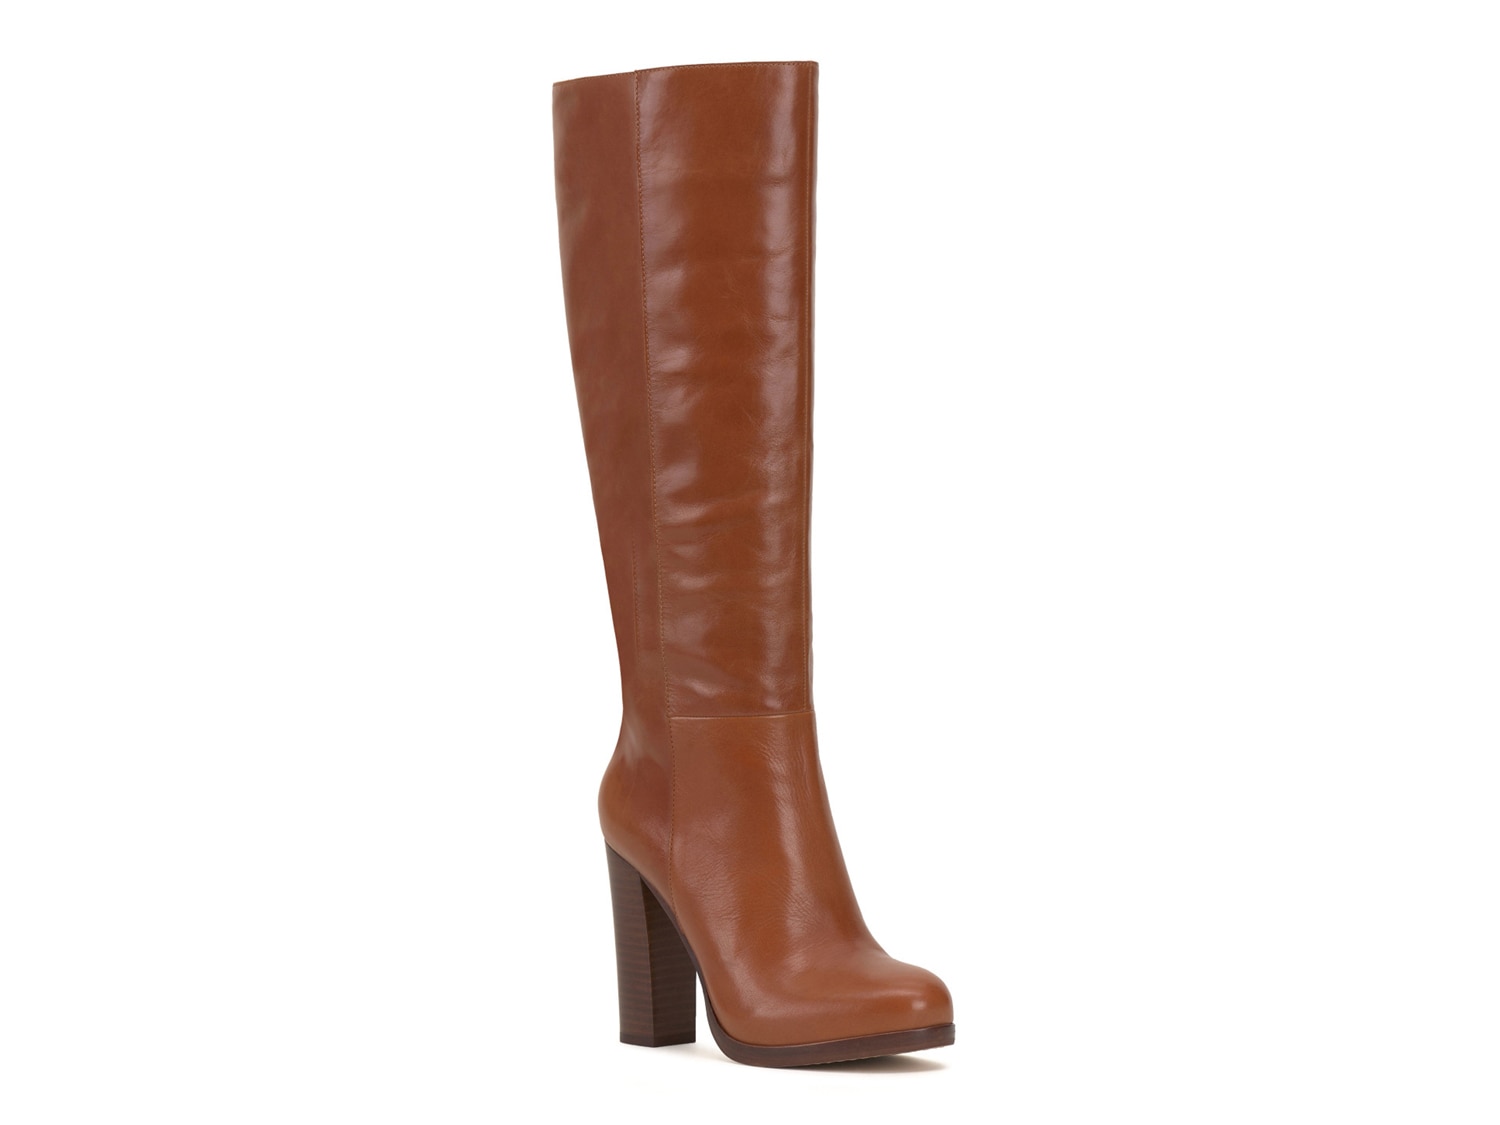 Vince Camuto Crutinie Boot - Free Shipping | DSW